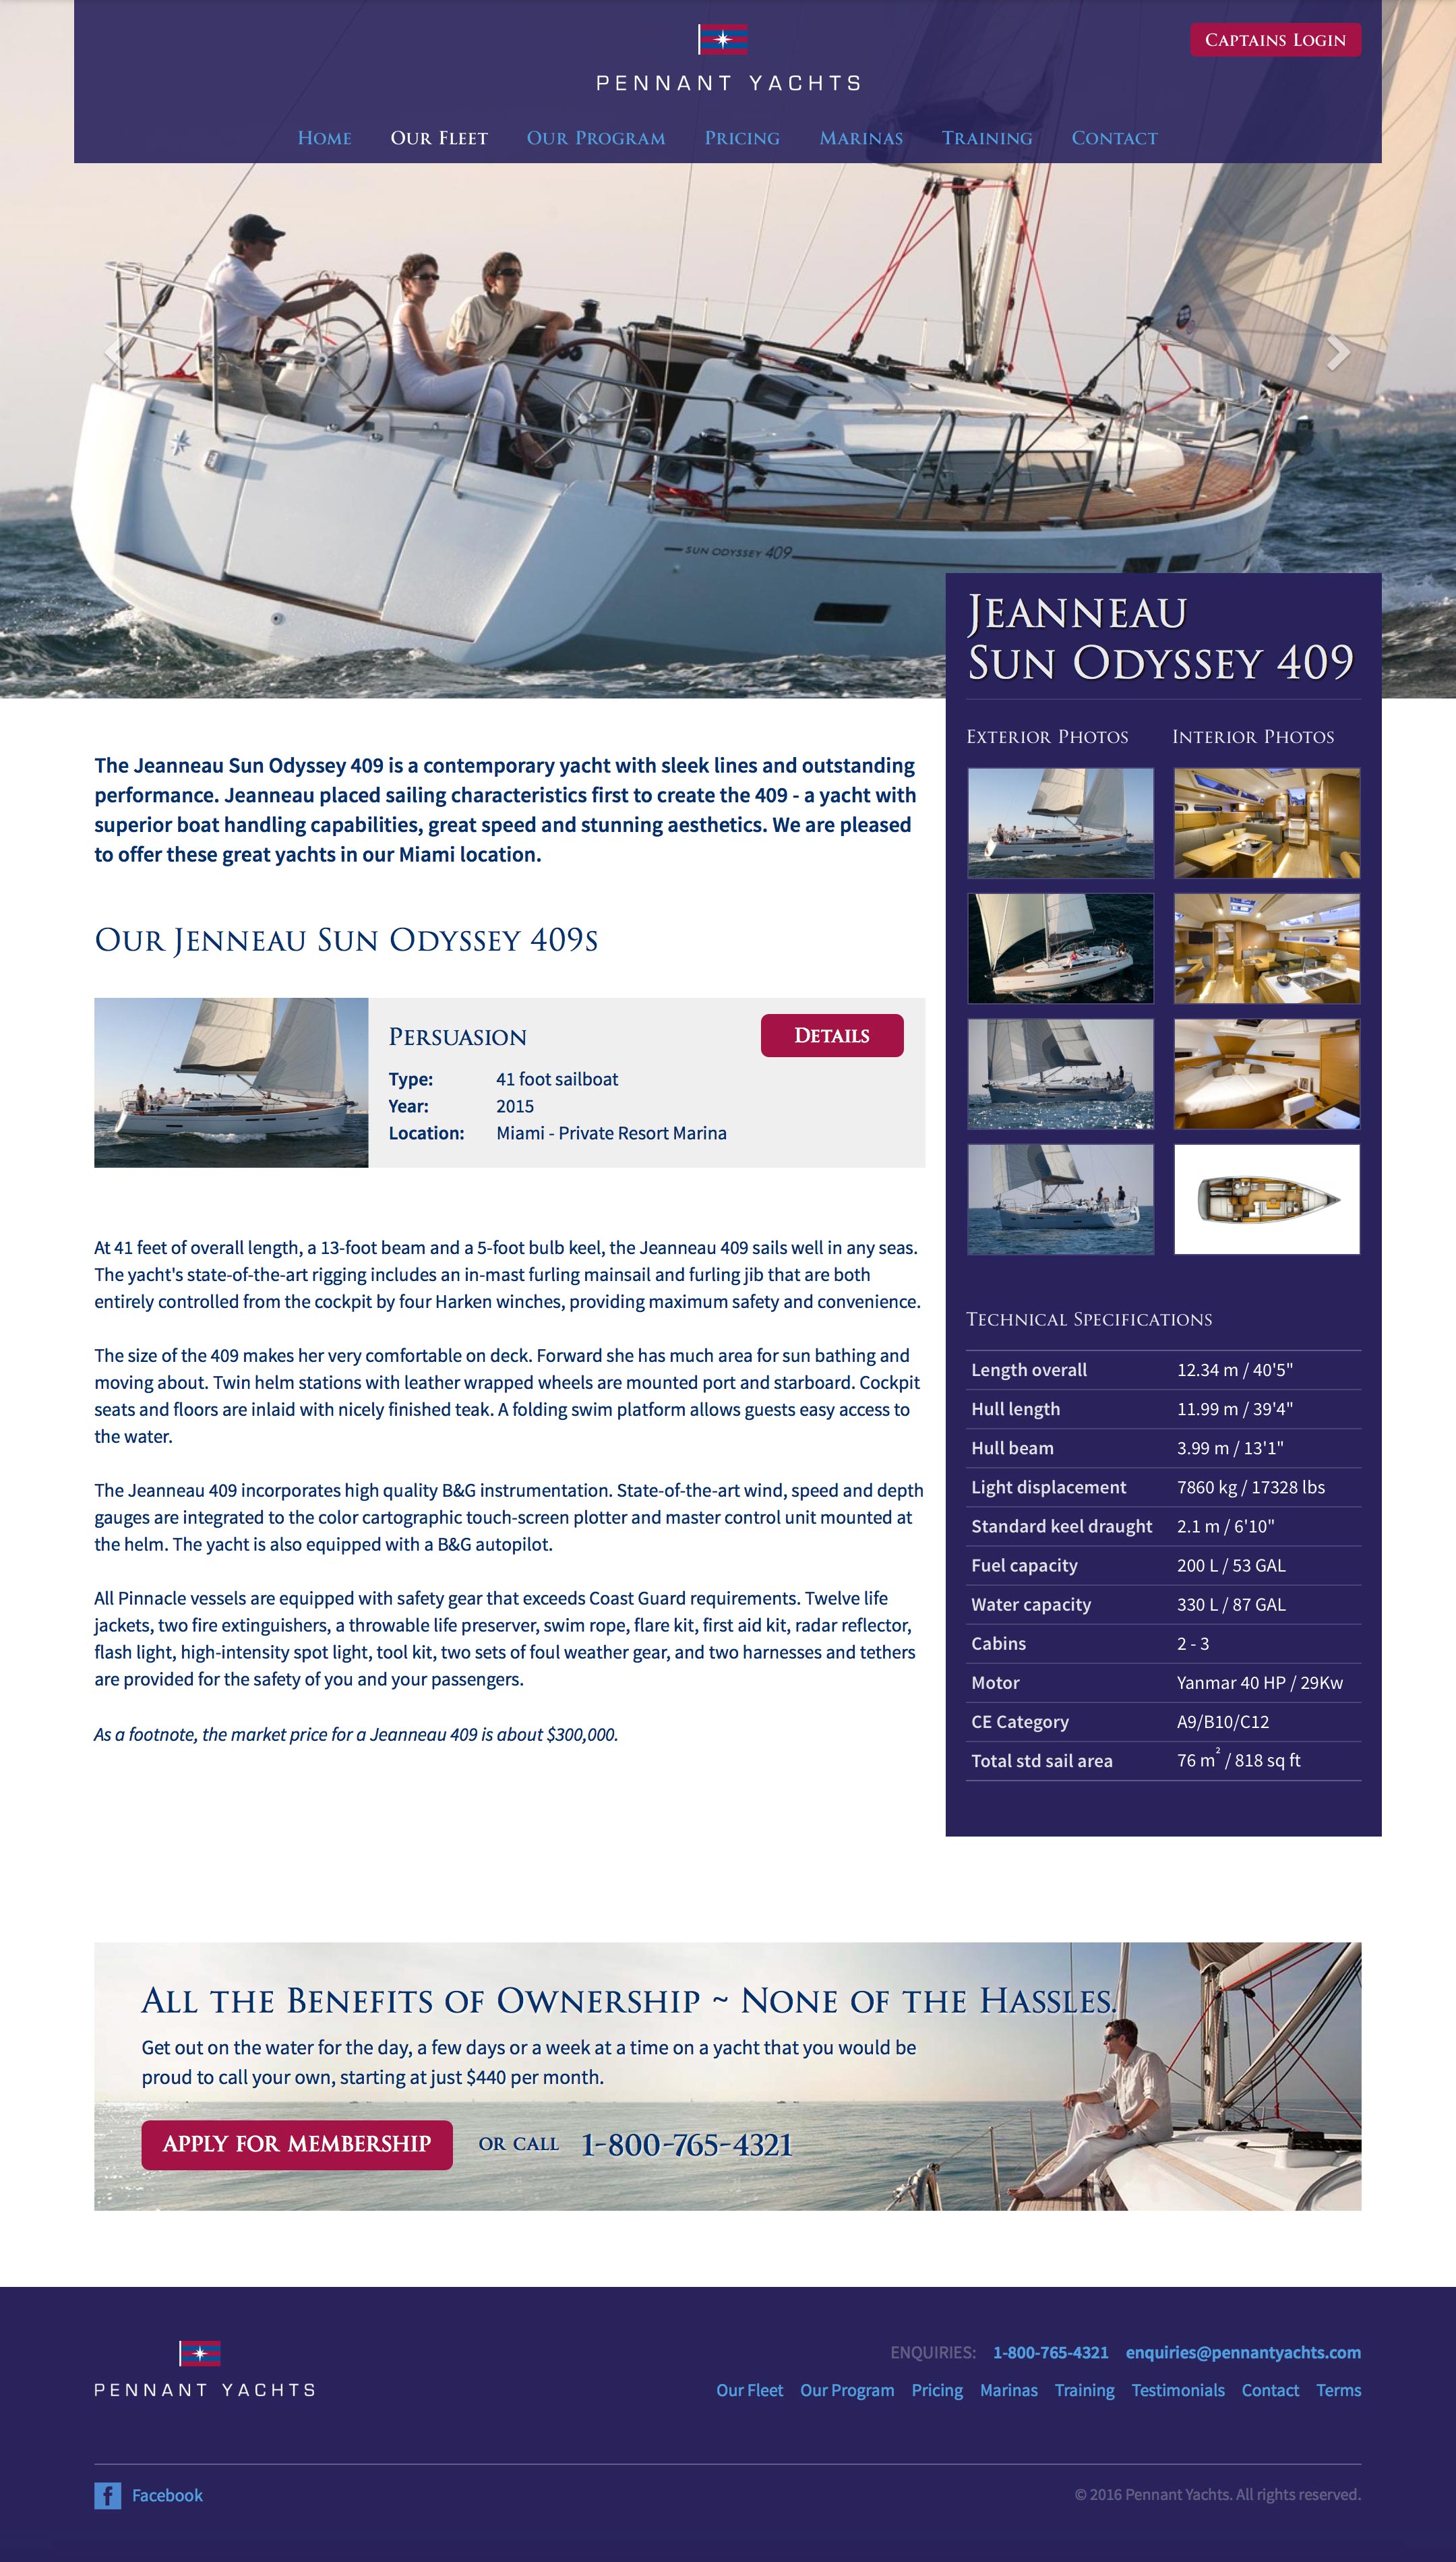 Detail about a yacht on the Pennant Yachts fleet.